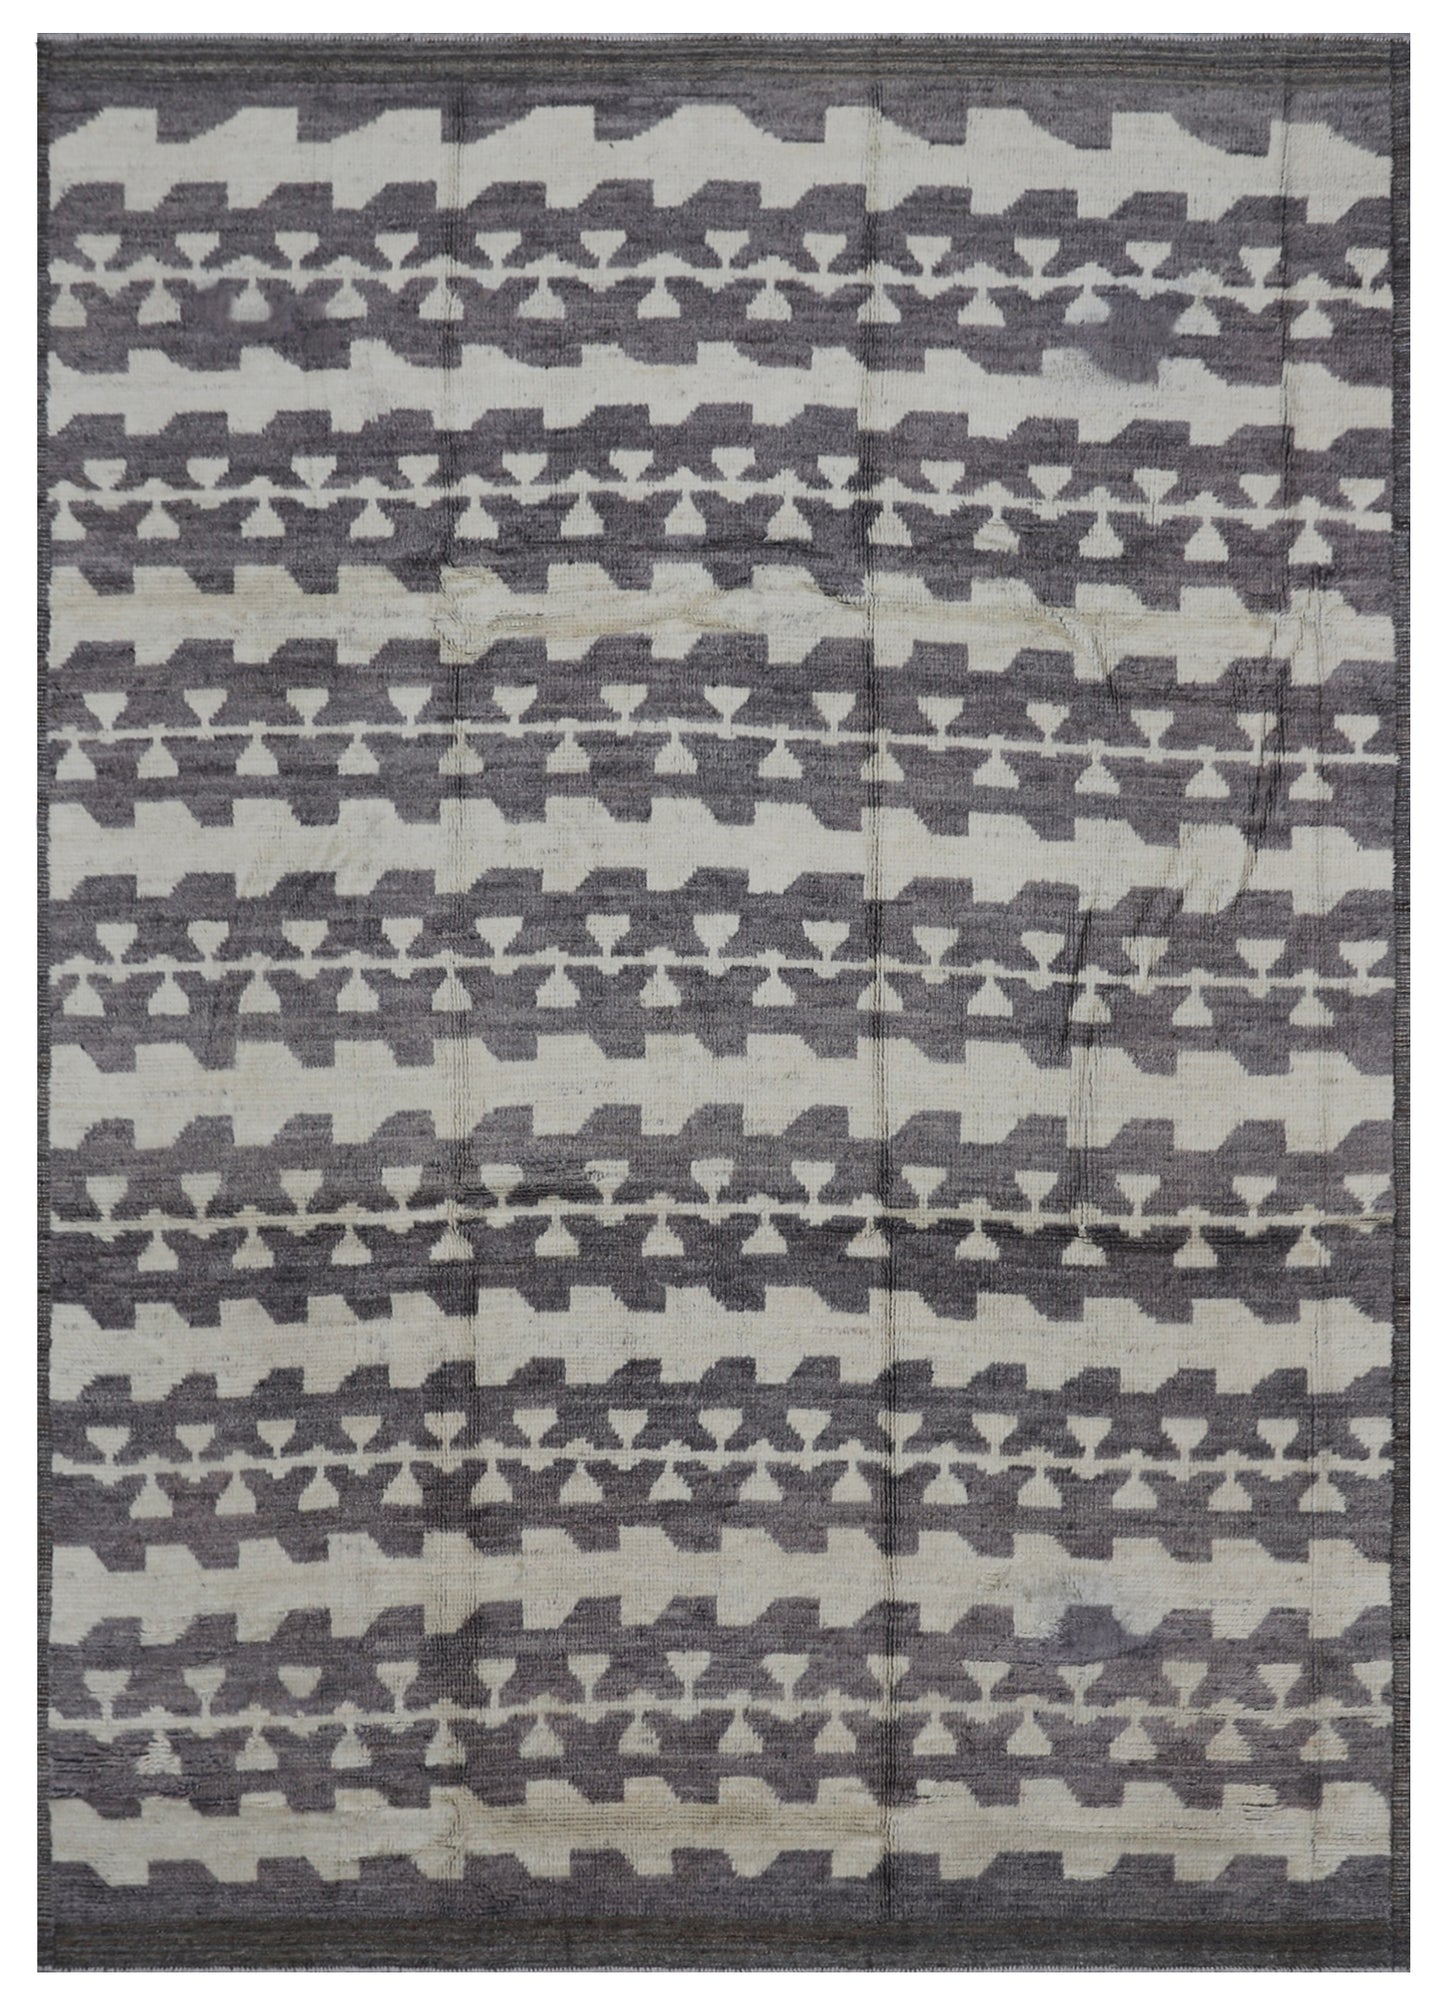 13'x9' Ariana Moroccan Style Grey Off White Rug